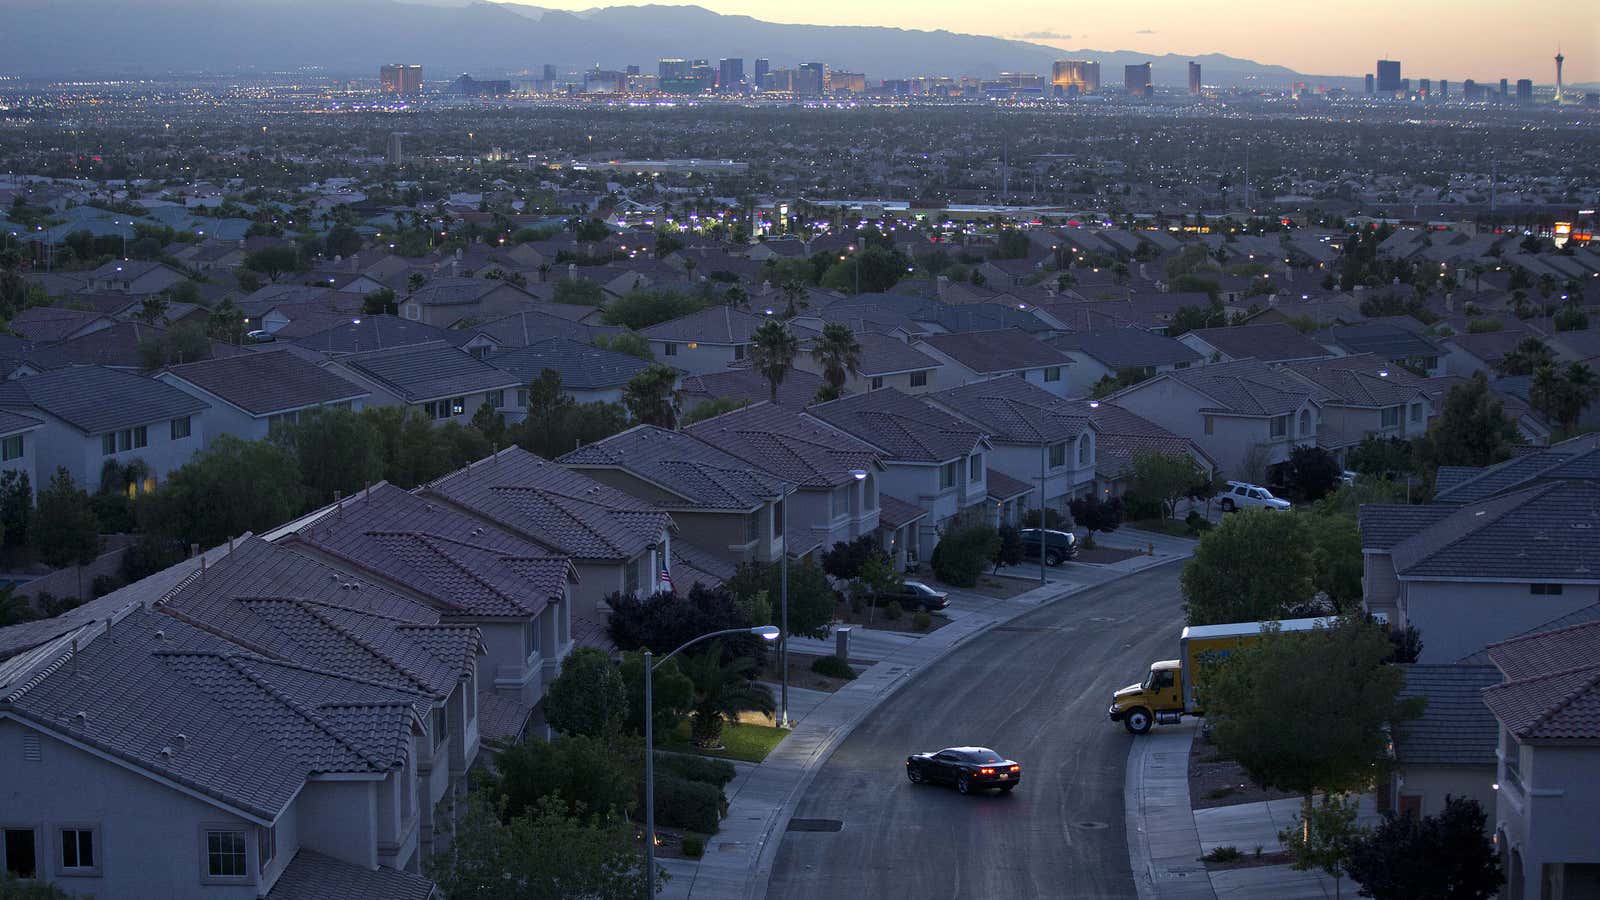 Even housing-traumatized Nevada is brightening up.